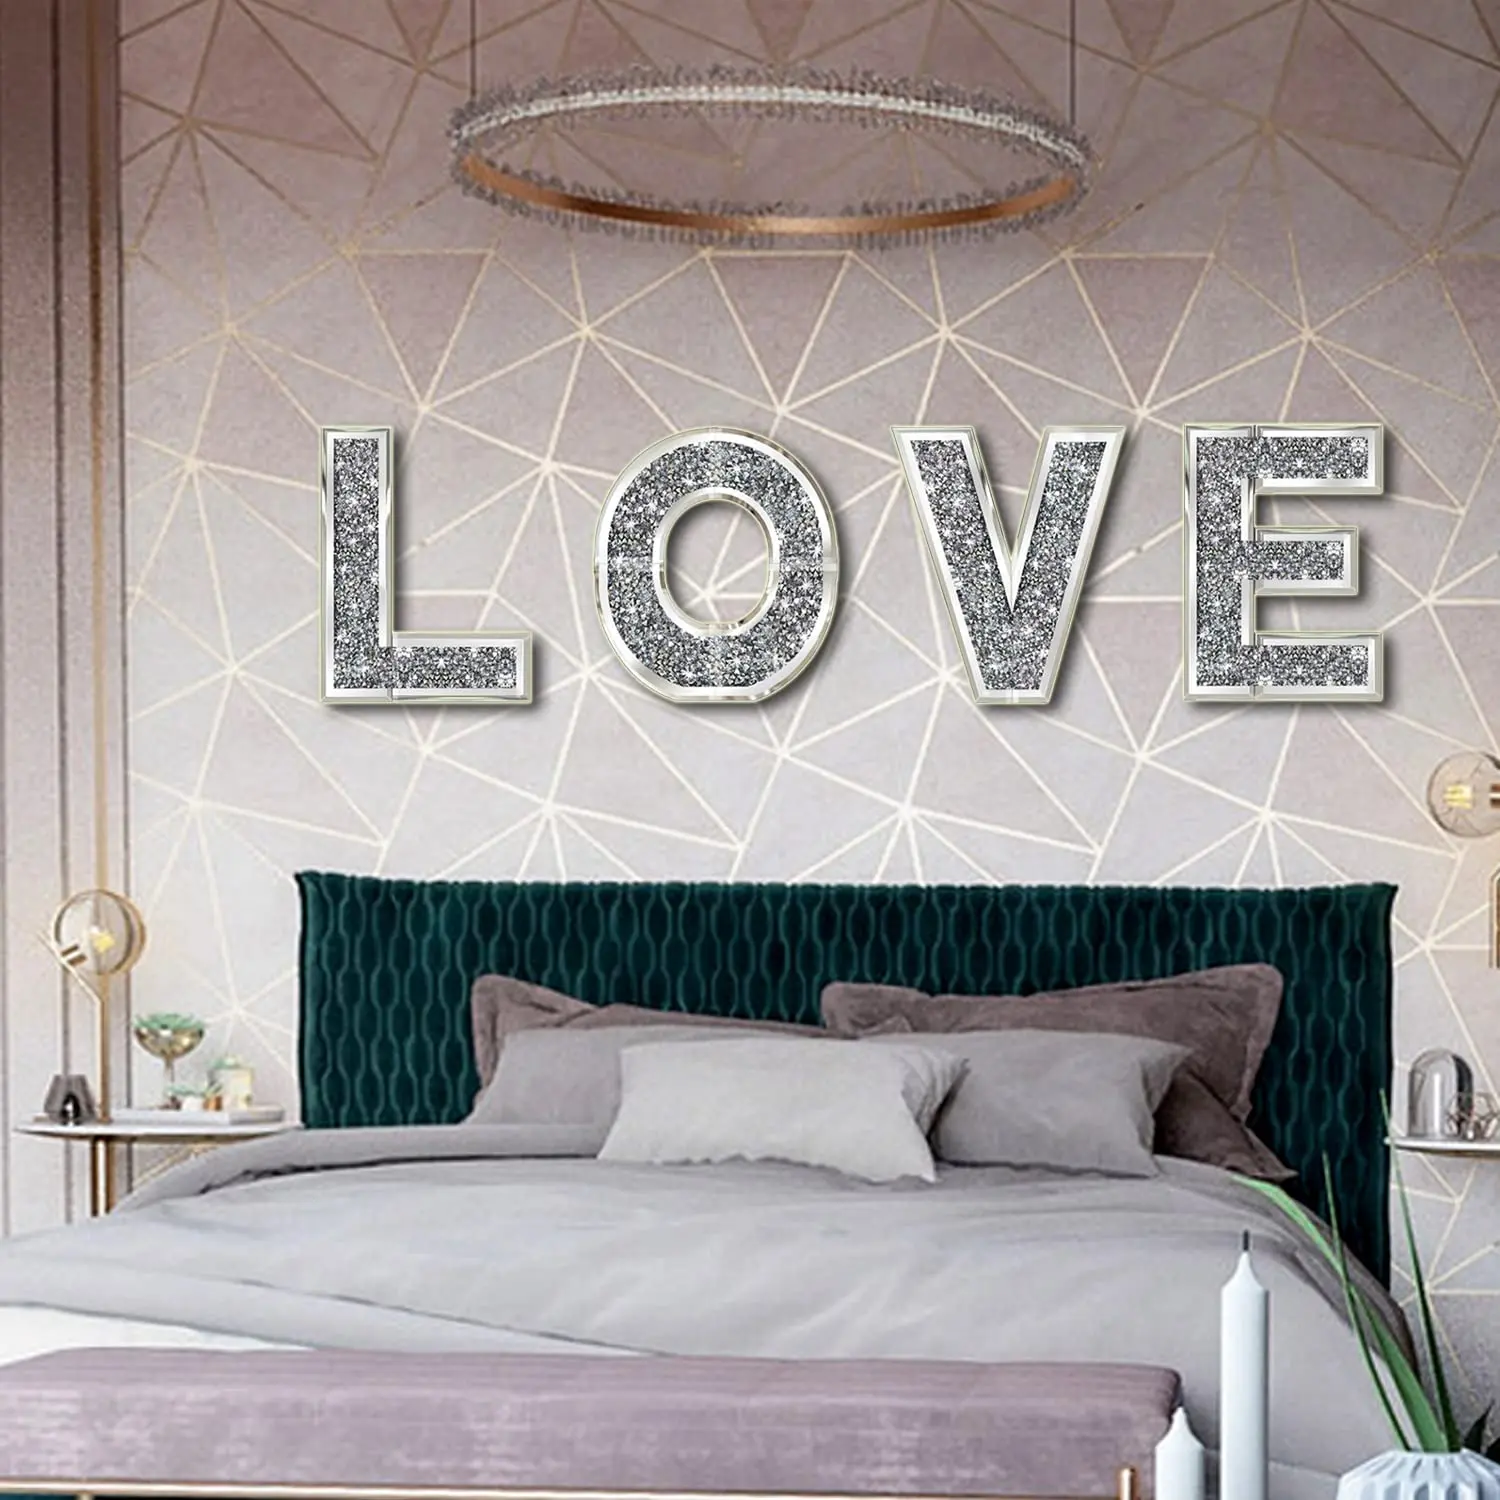 Glam Crystal Diamond Silver Mirror 4 <span class=keywords><strong>Pcs</strong></span> lettere indipendenti Love Wall Art Decoration Mirror Wall Decor